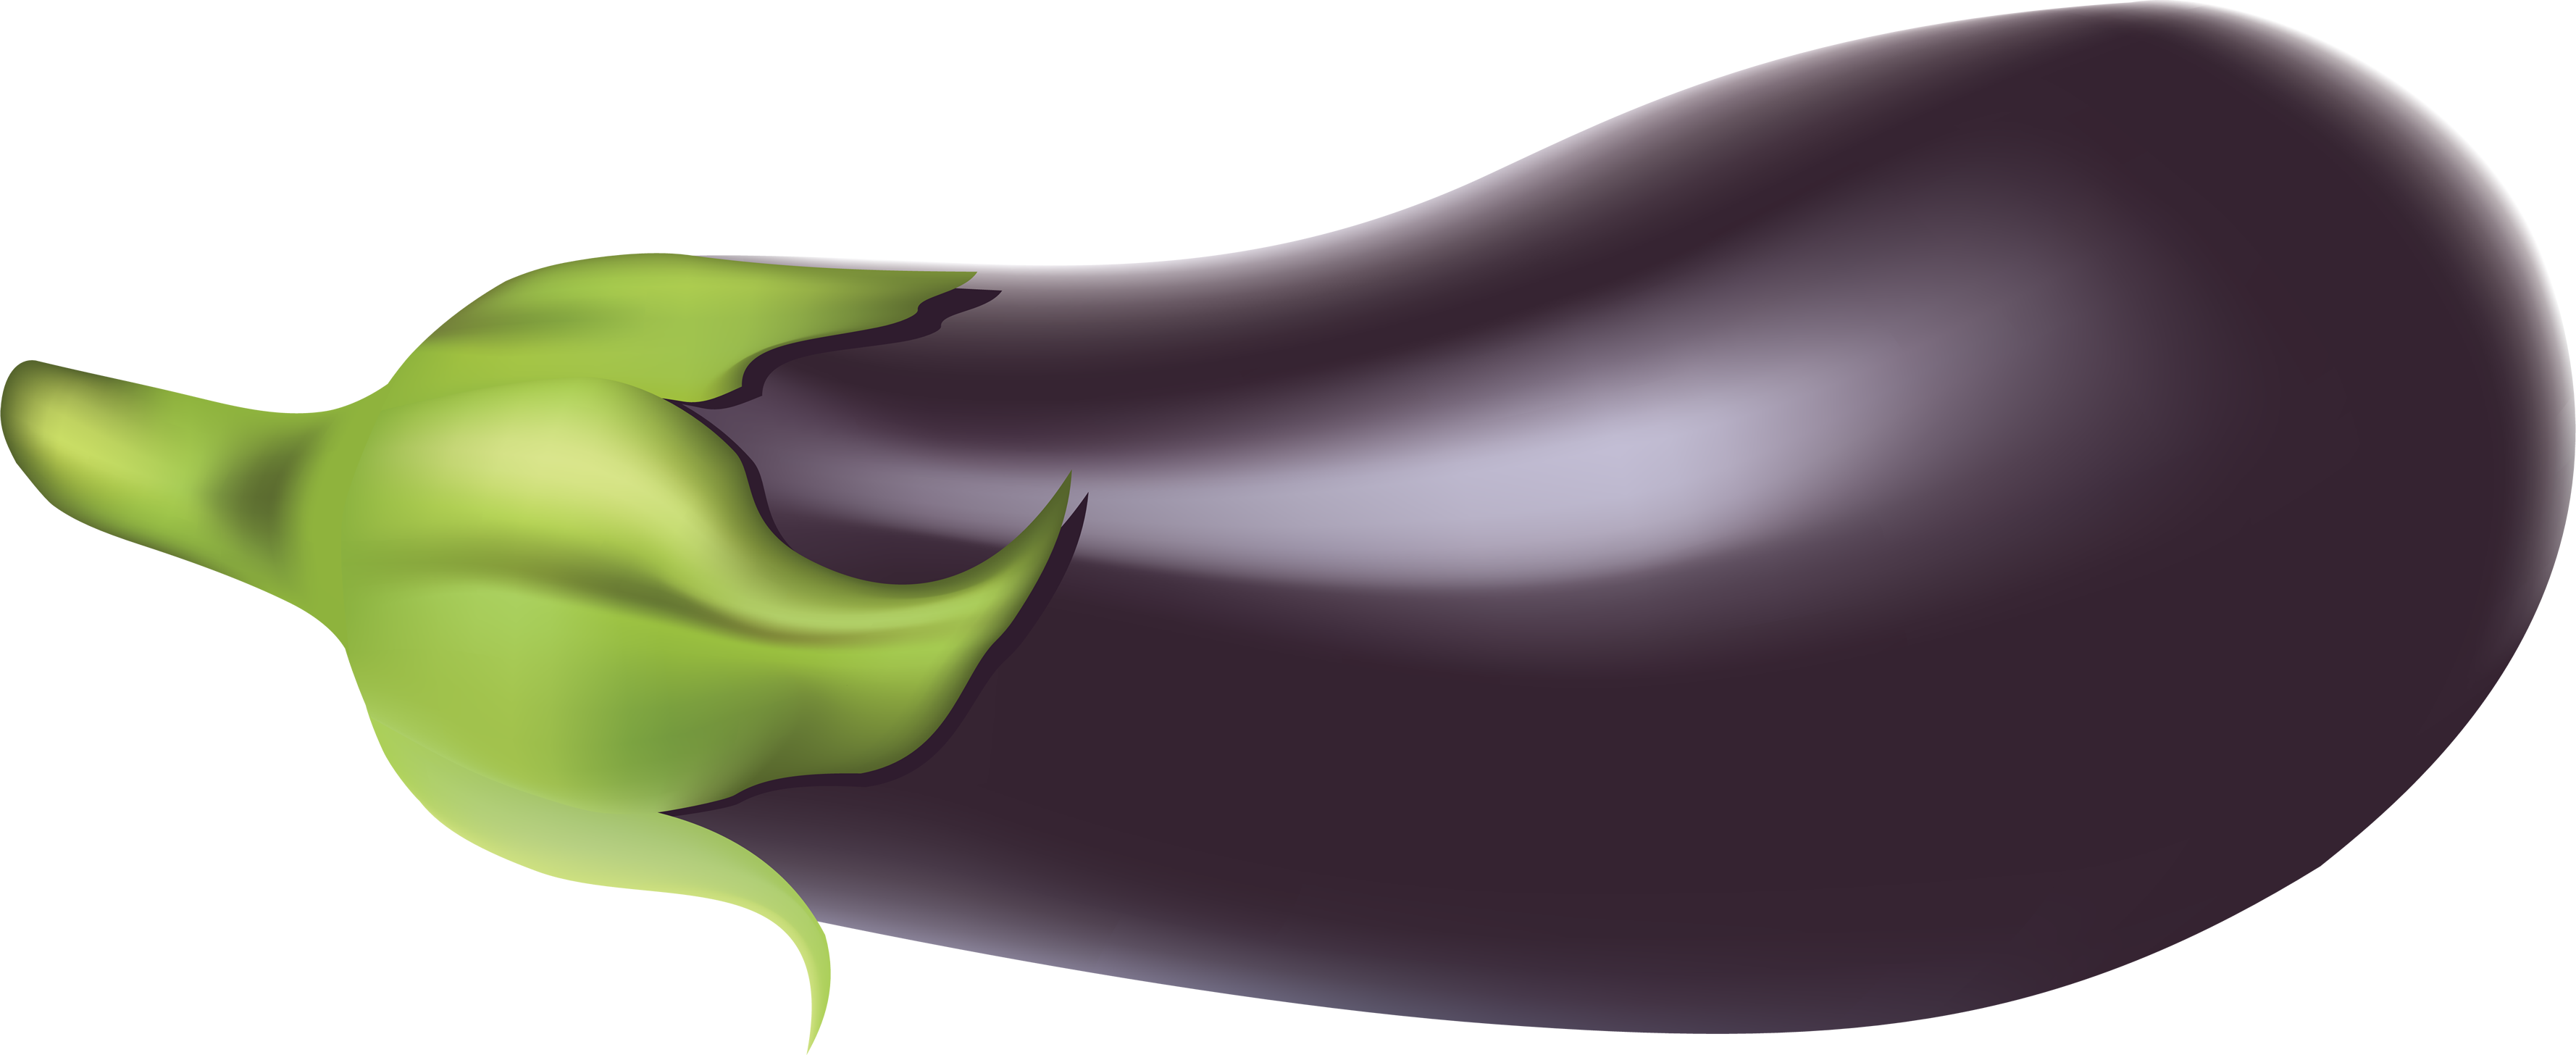 Аубержан PNG Picture